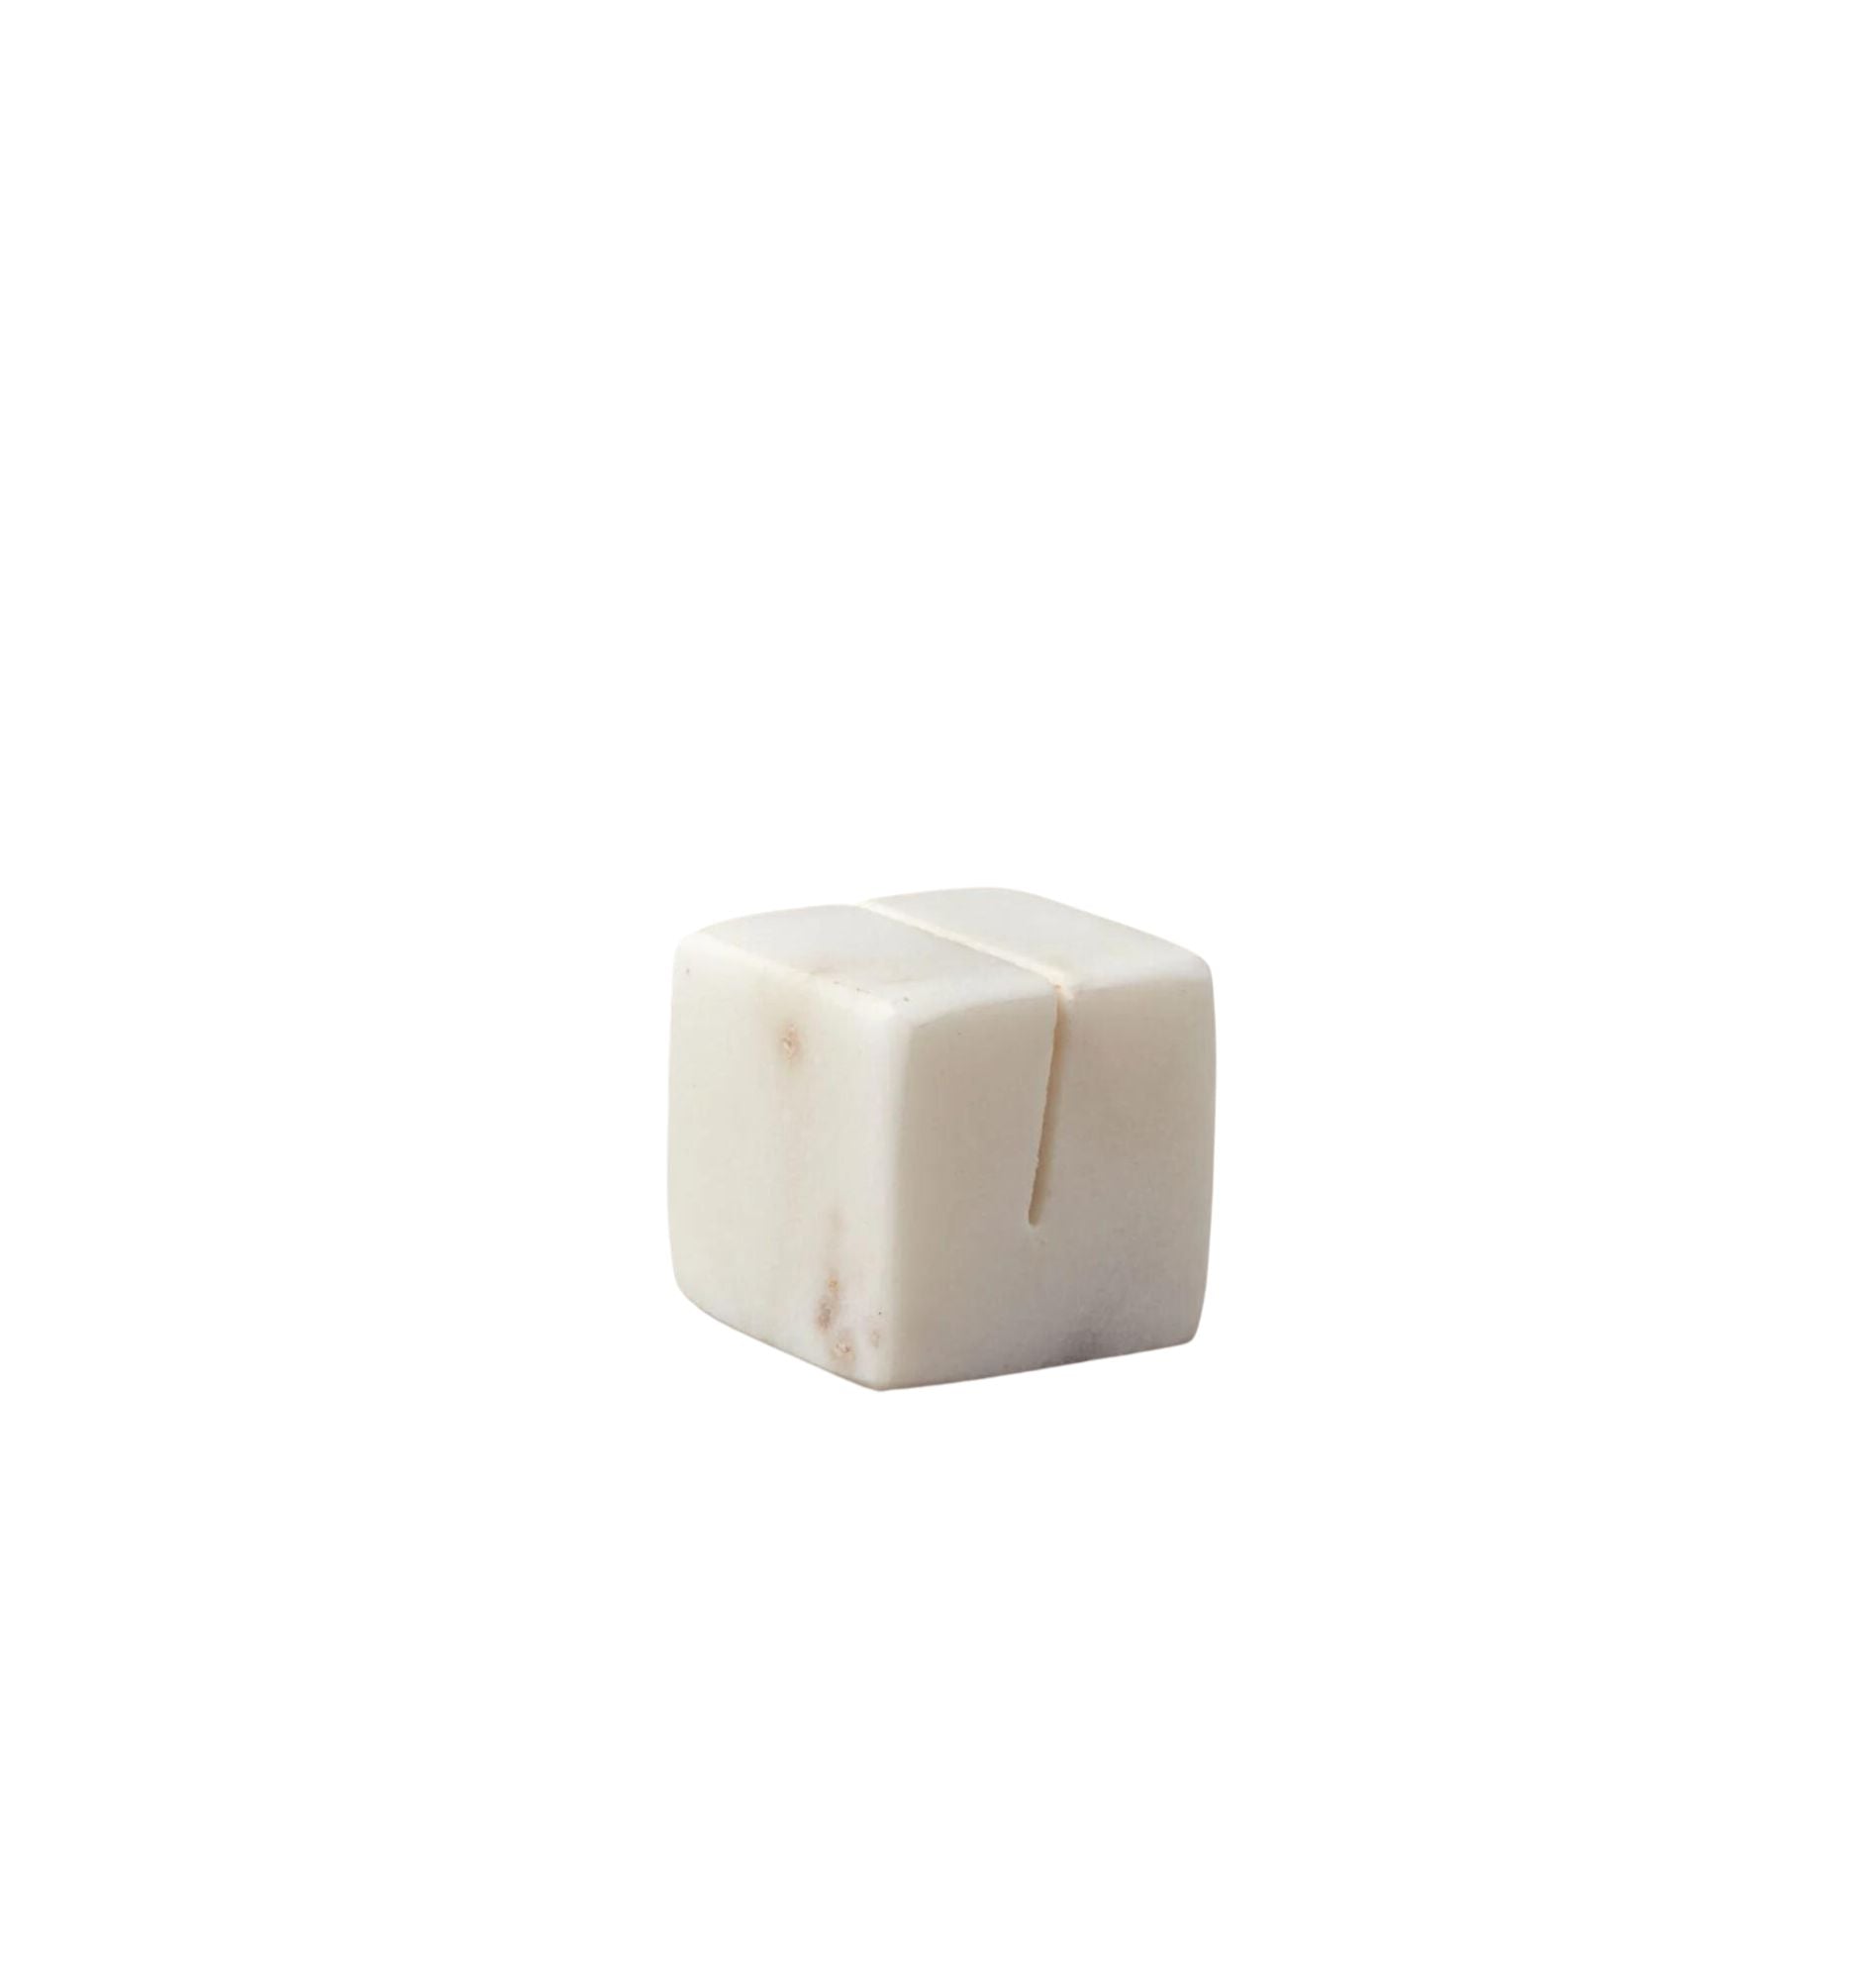 Marble Cube Placecard Holder